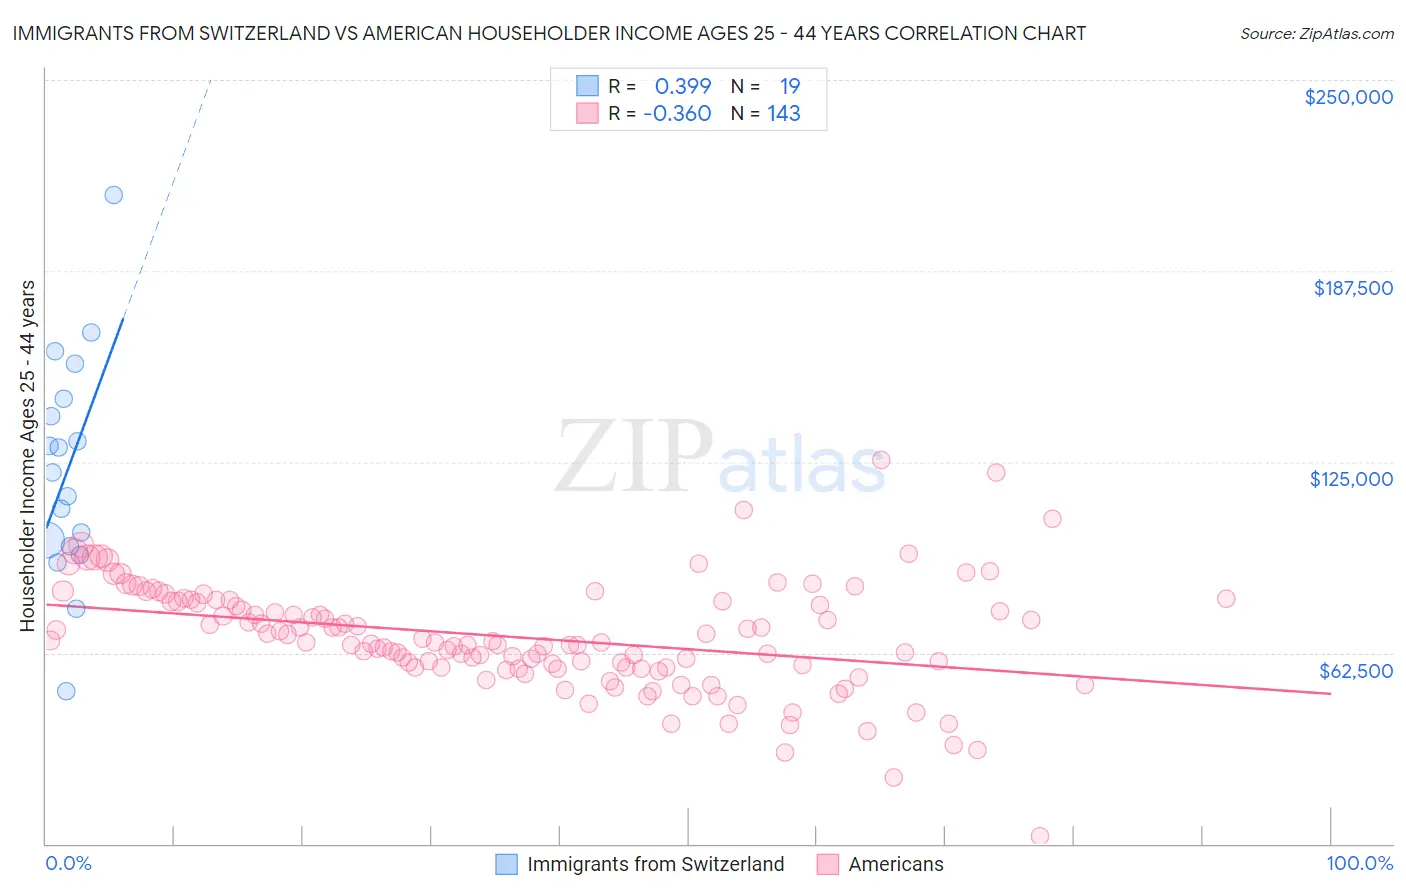 Immigrants from Switzerland vs American Householder Income Ages 25 - 44 years